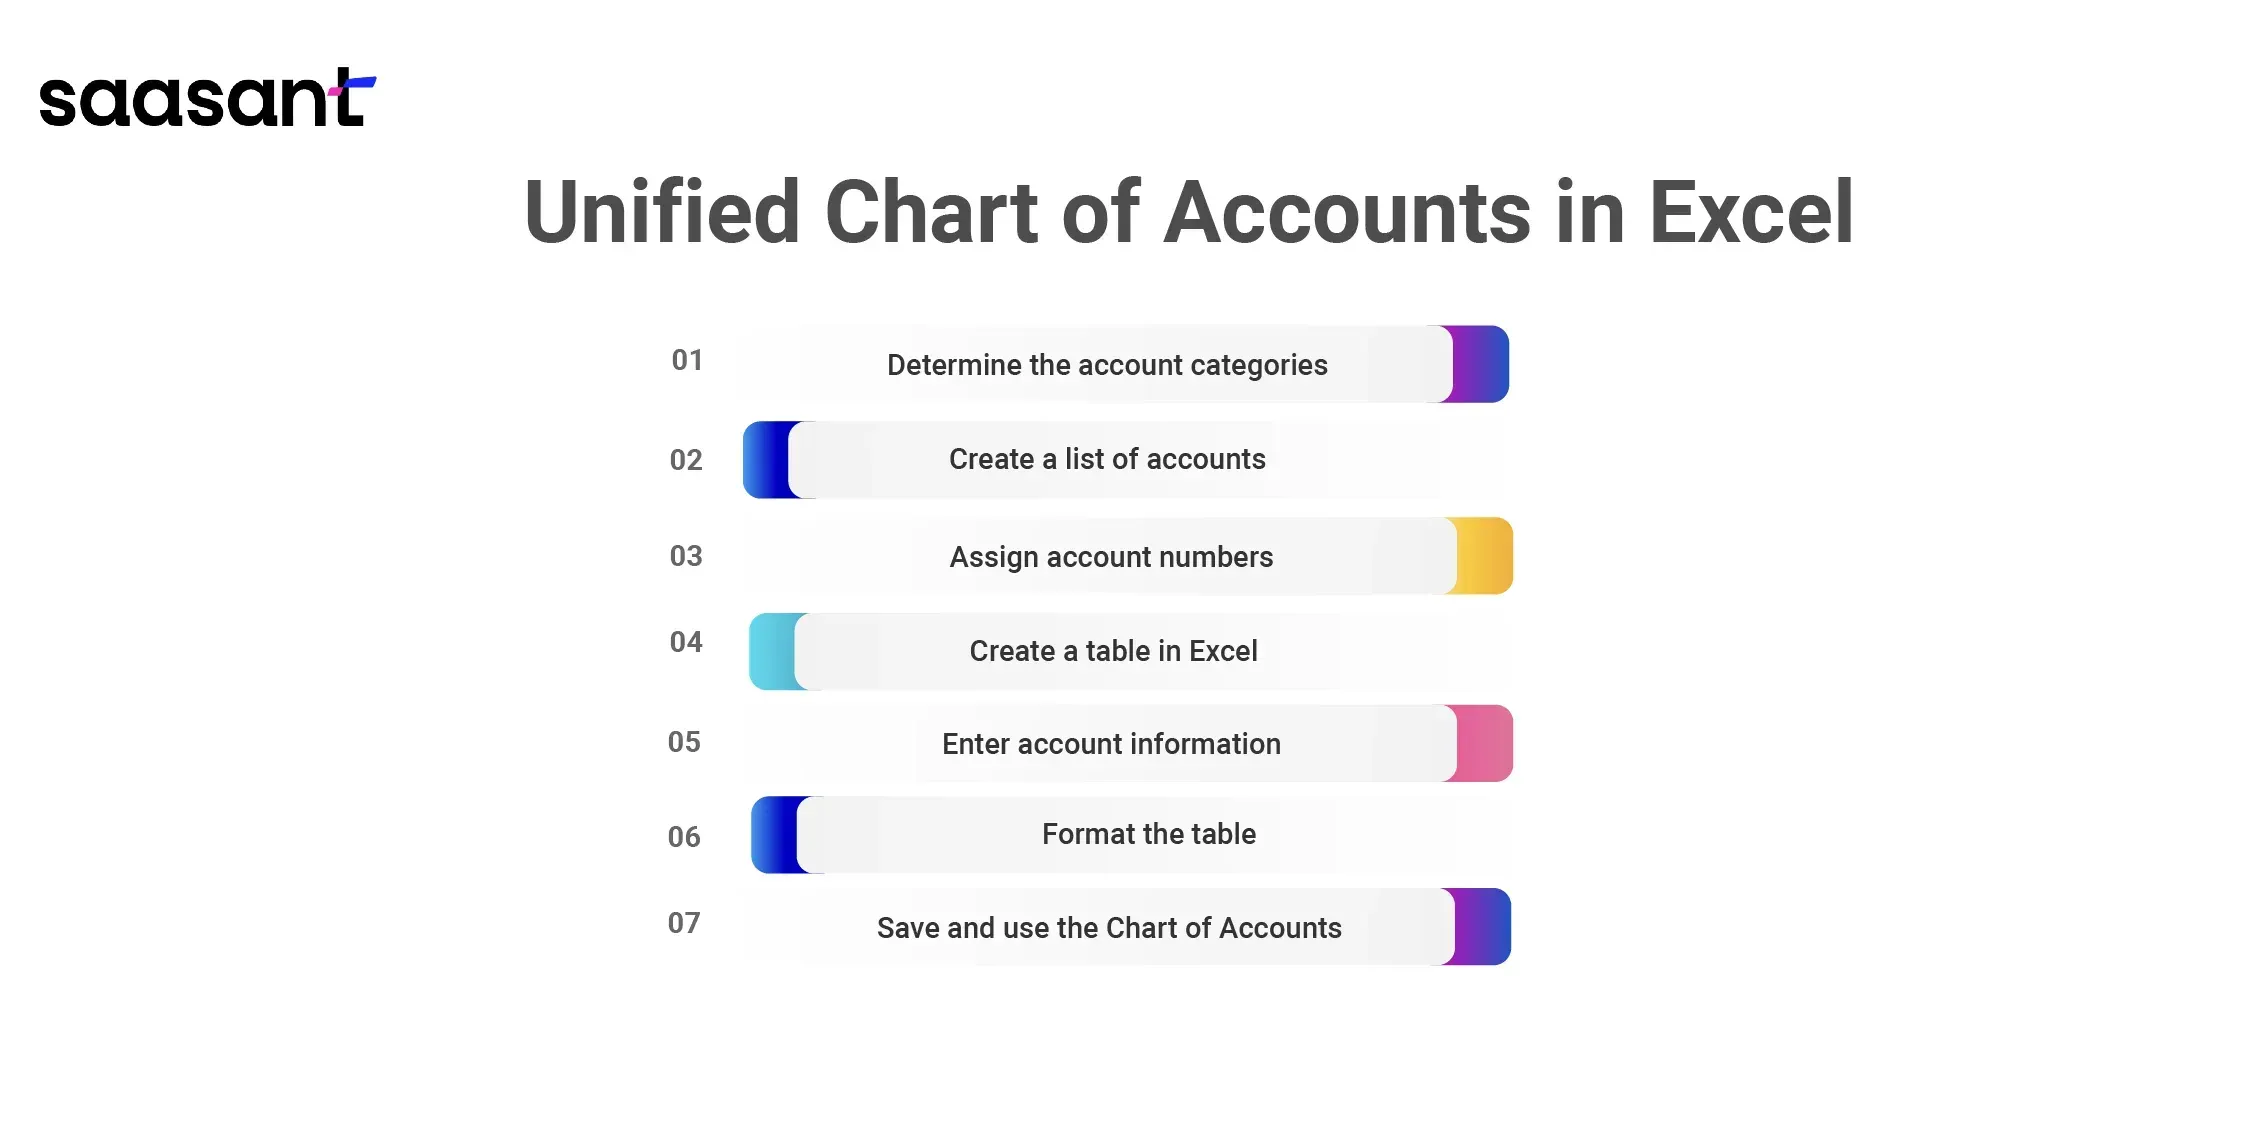 Unified Chart of Accounts in Excel